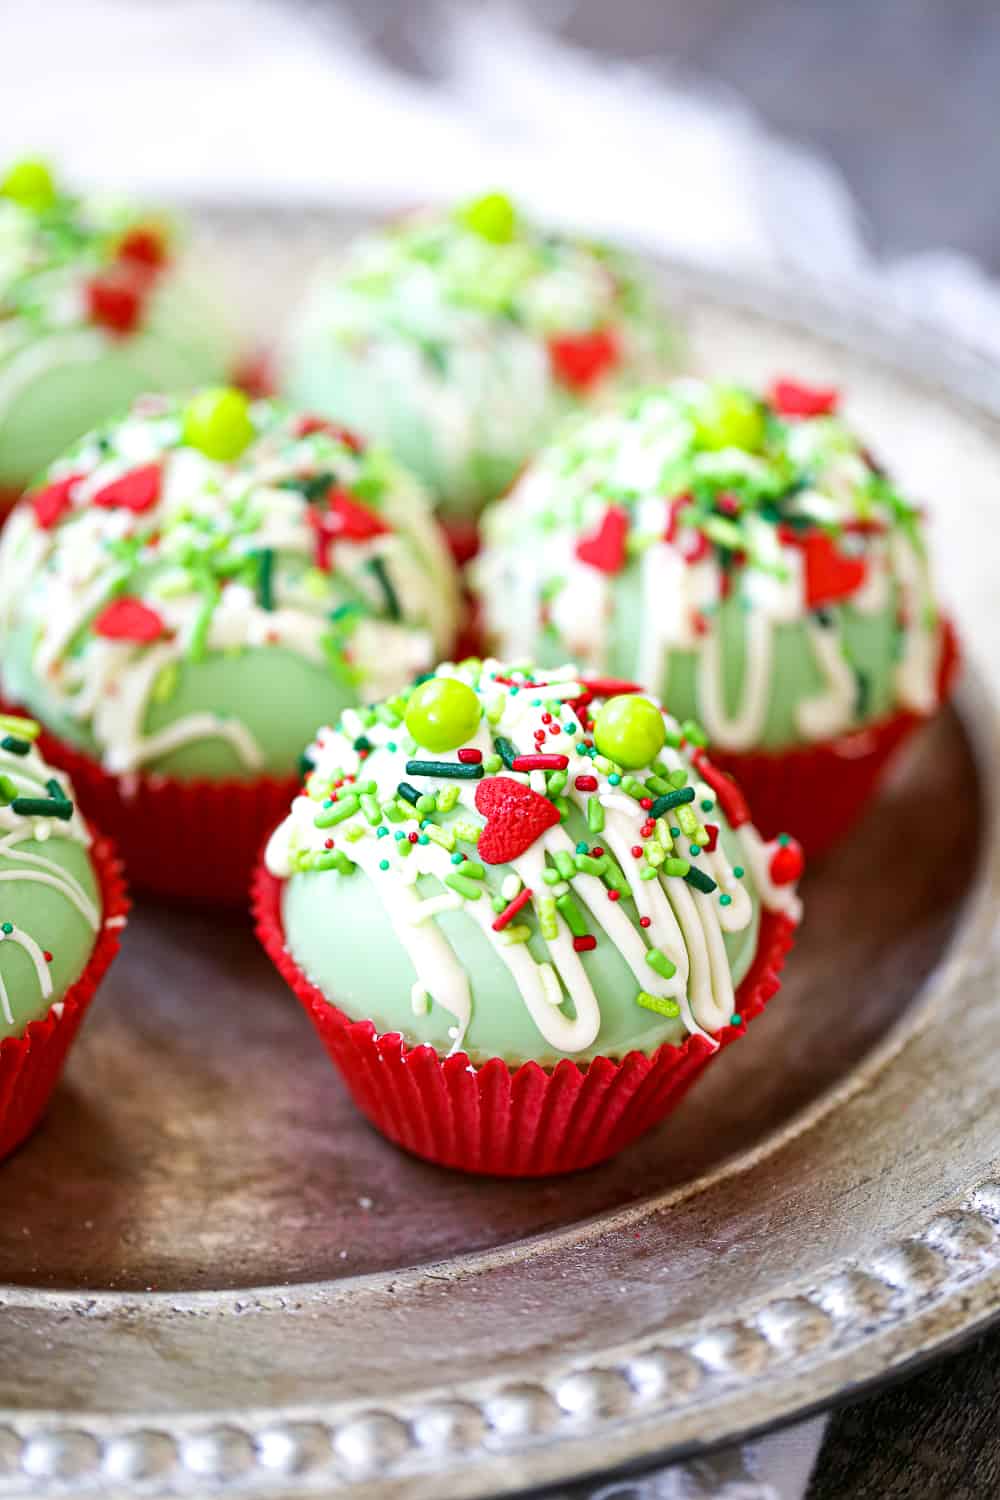 Grinch Cocoa Bombs